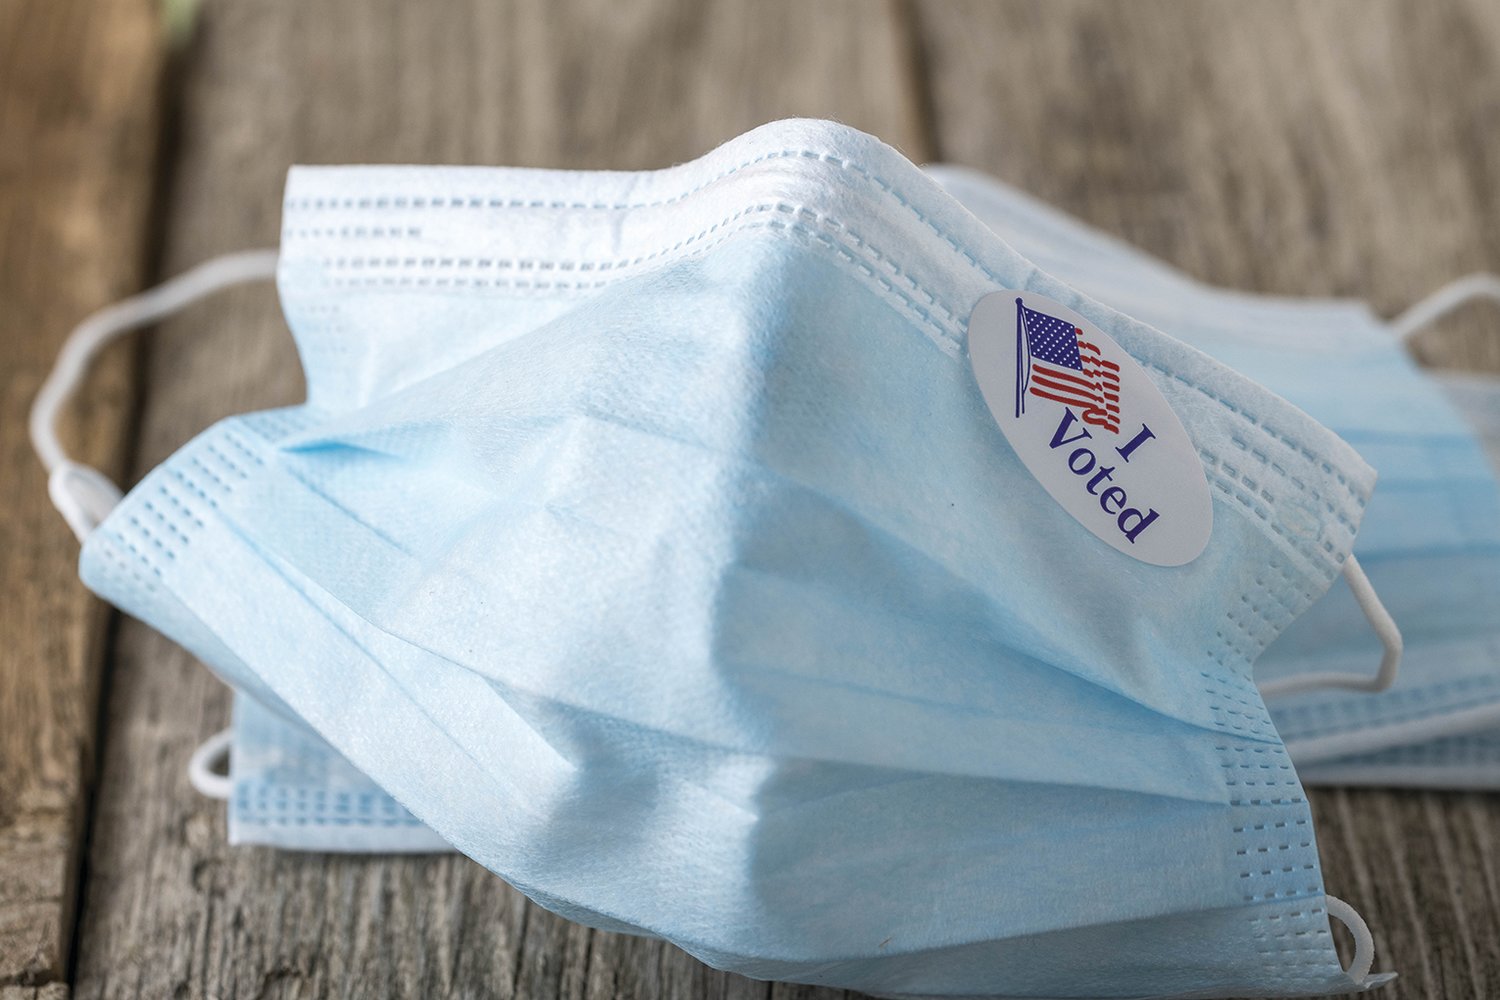 While masks are not required under Tex. Gov. Greg Abbott's current executive order for the purpose of voting, Abbott and other community leaders encourage voters to wear a mask to the polls to reduce the risk of spreading COVID-19.